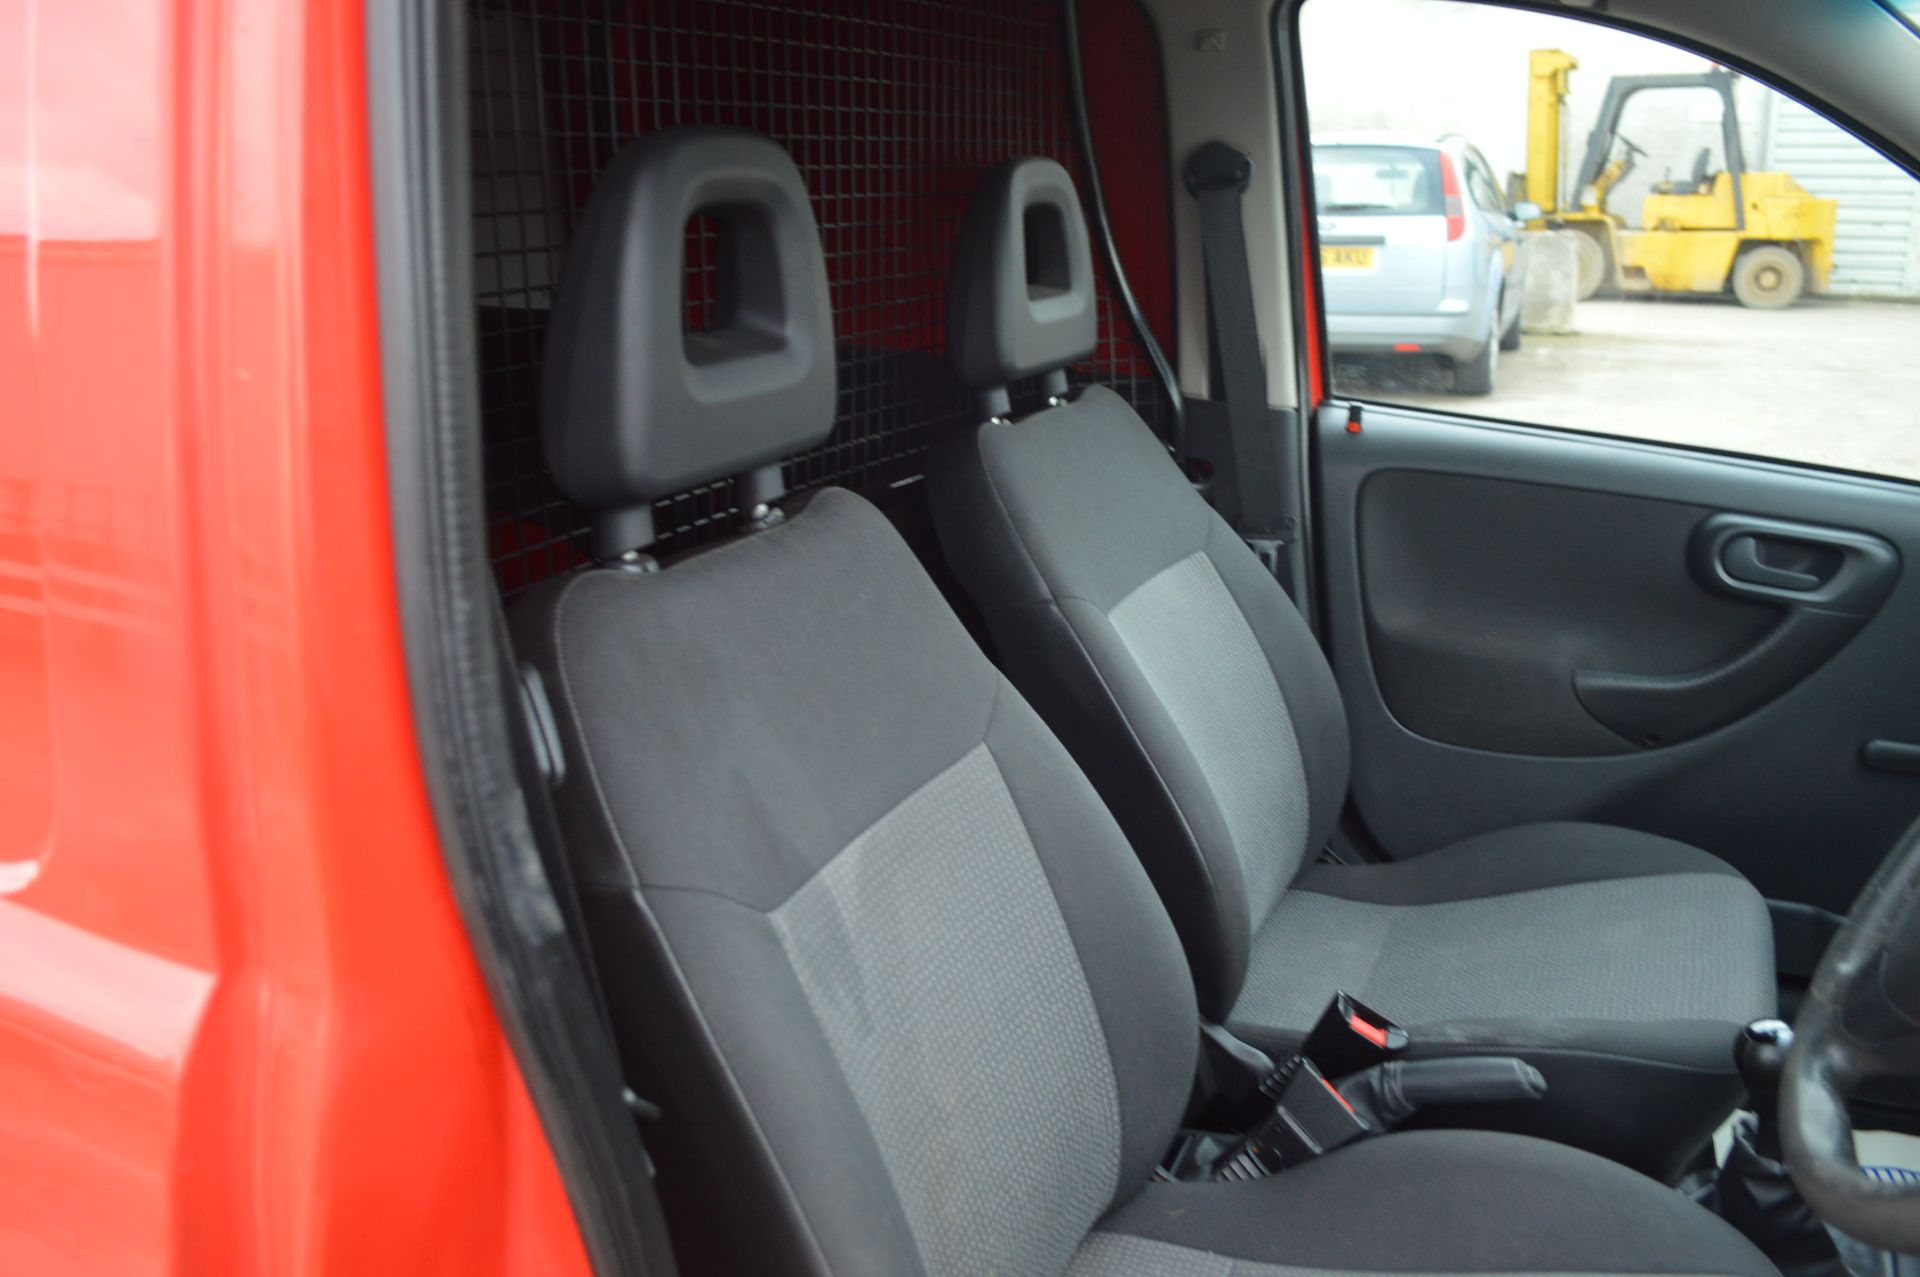 2008/57 REG VAUXHALL COMBO 1700 CDTI, SHOWING 1 OWNER FROM NEW *NO VAT* - Image 13 of 16